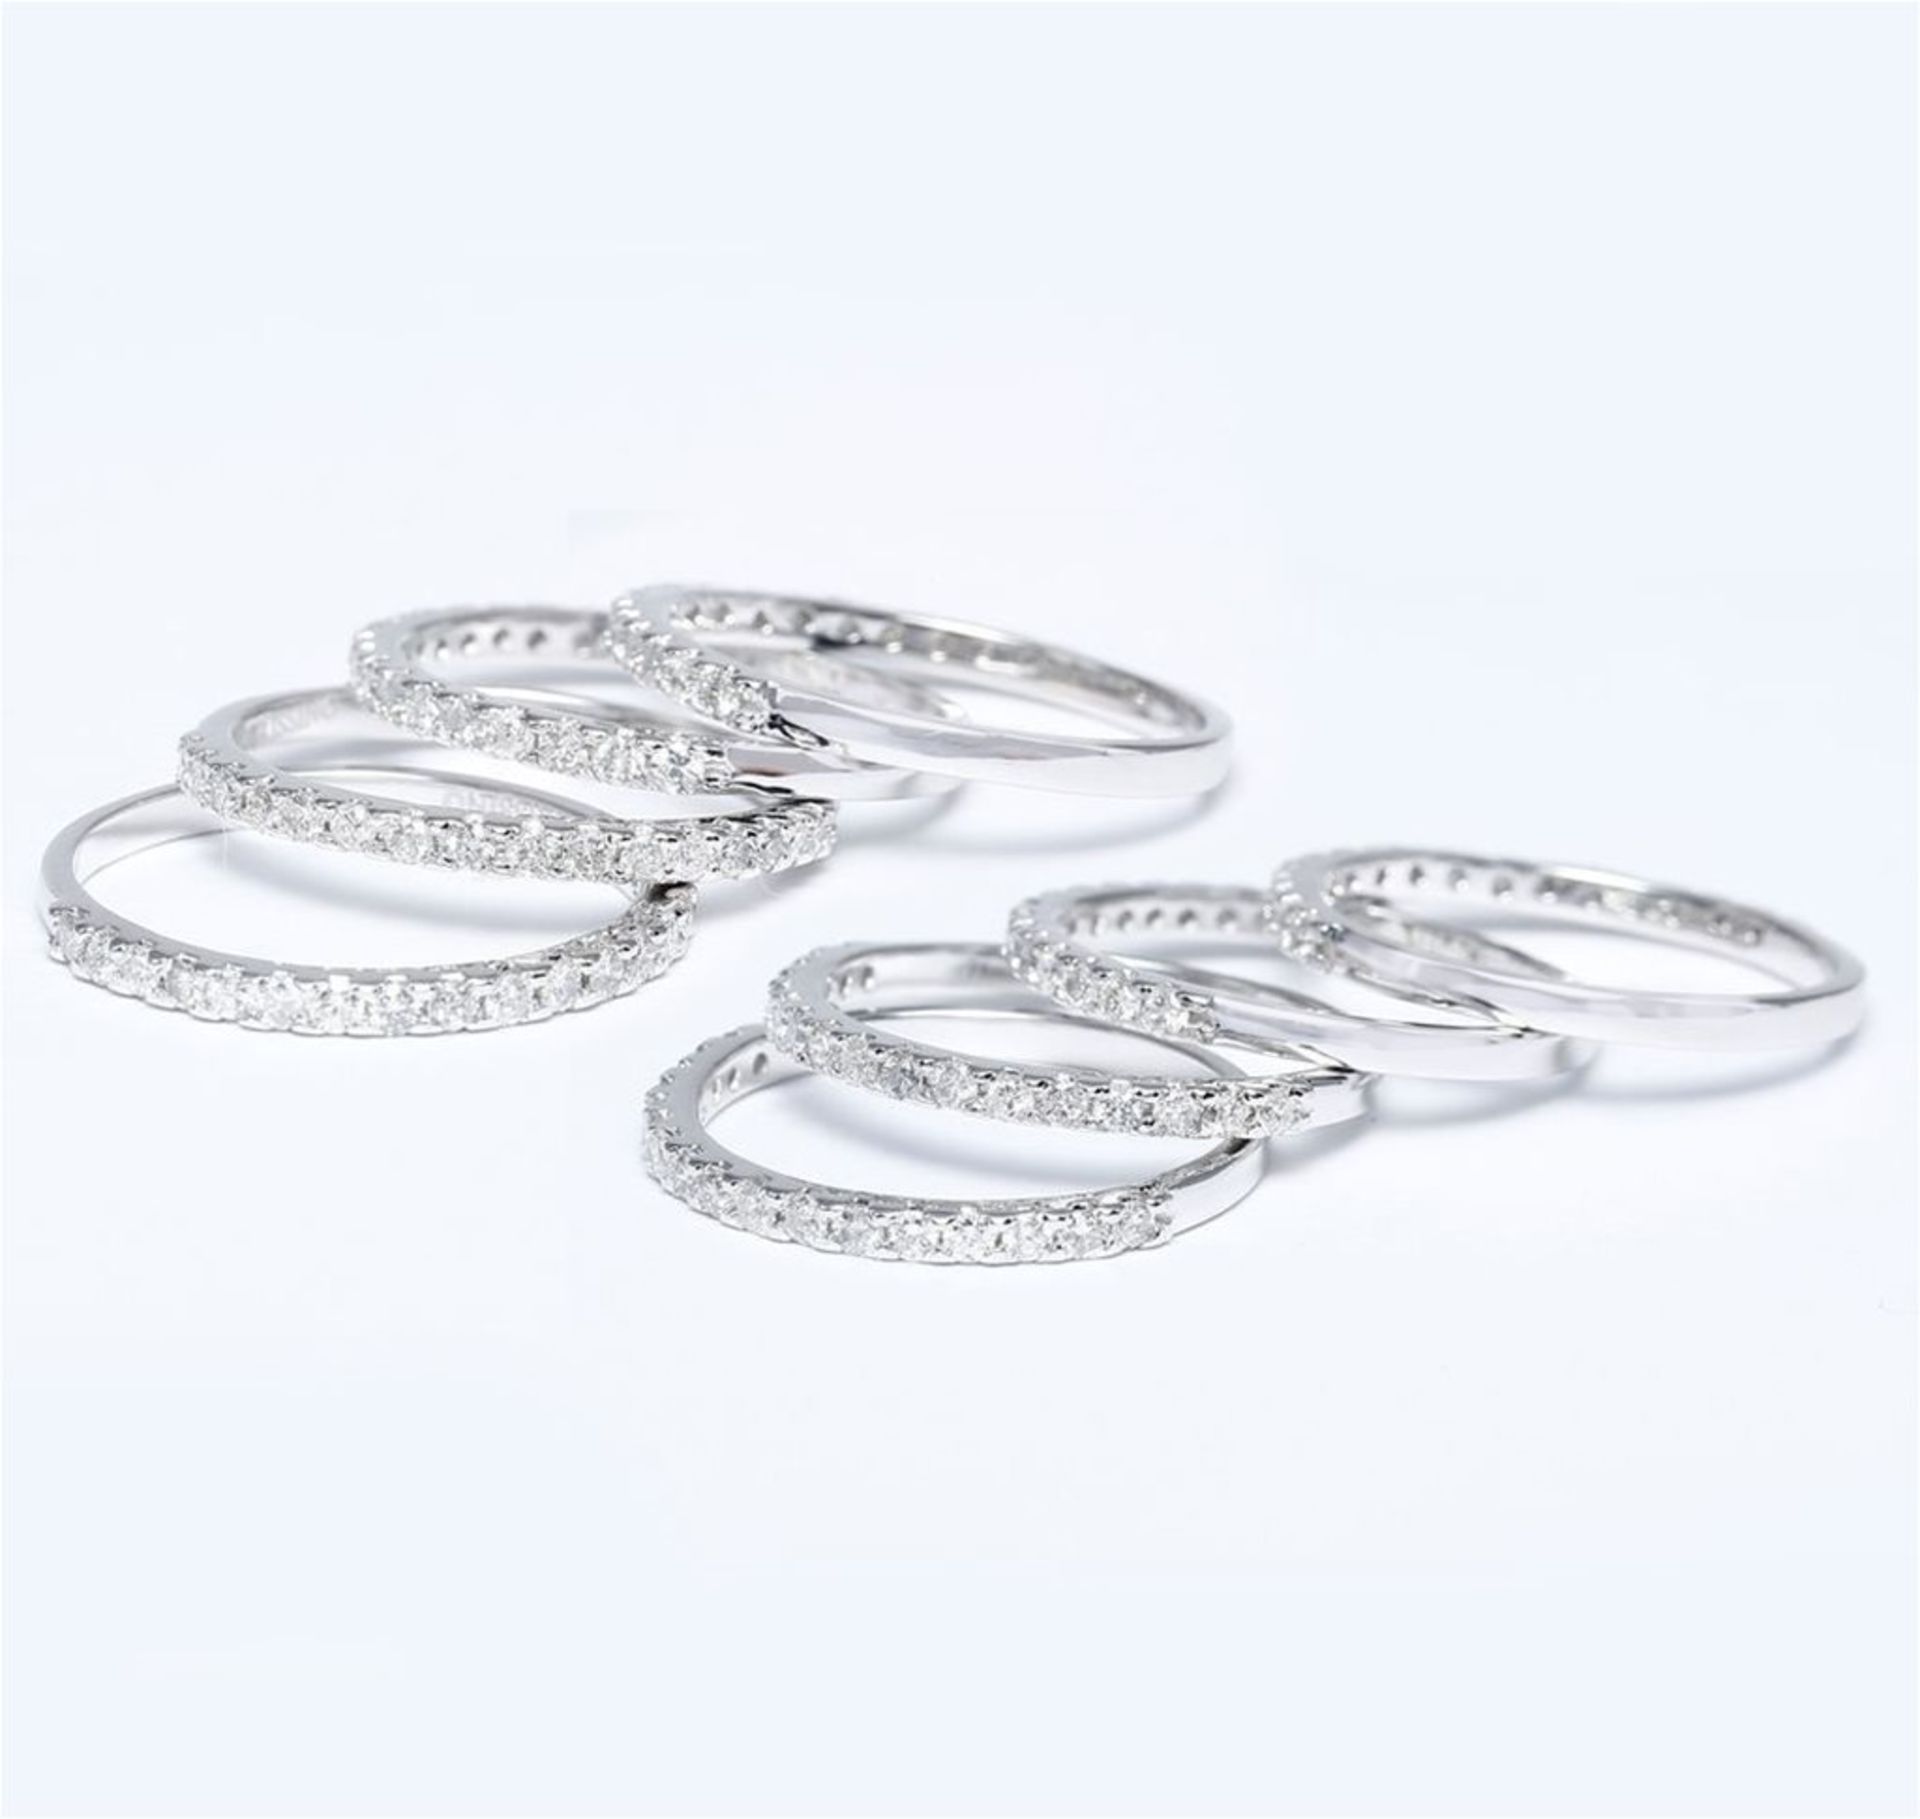 14 K / 585 White gold Set of 8 Diamond Rings stackable - Image 4 of 4